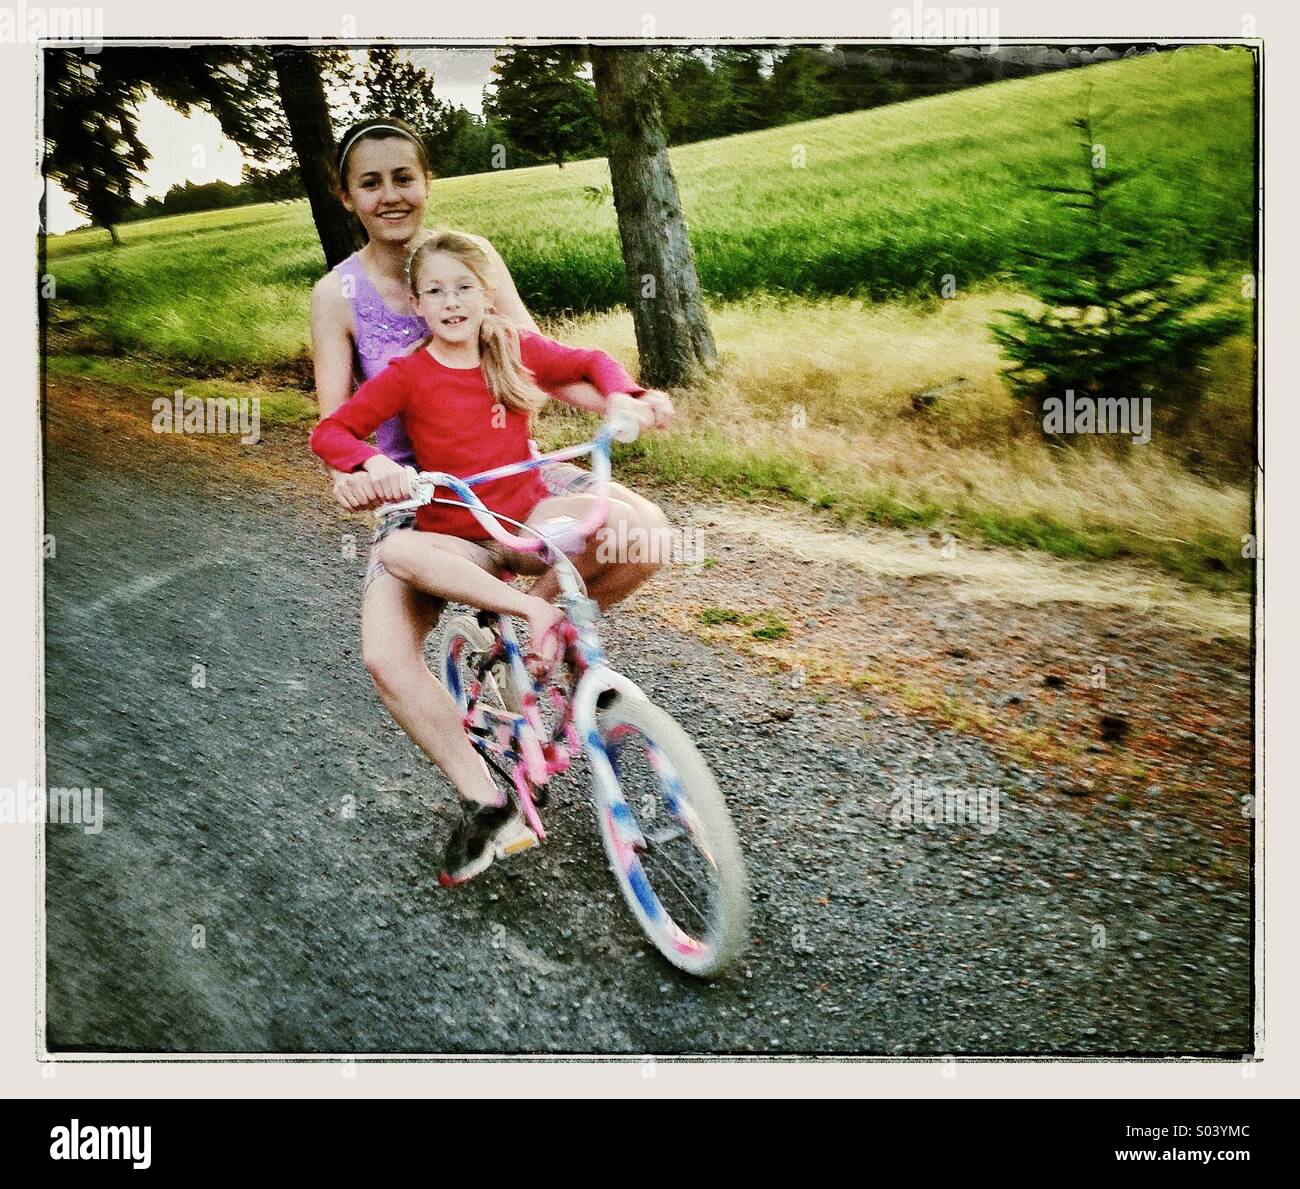 Two young girls riding bike together Stock Photo